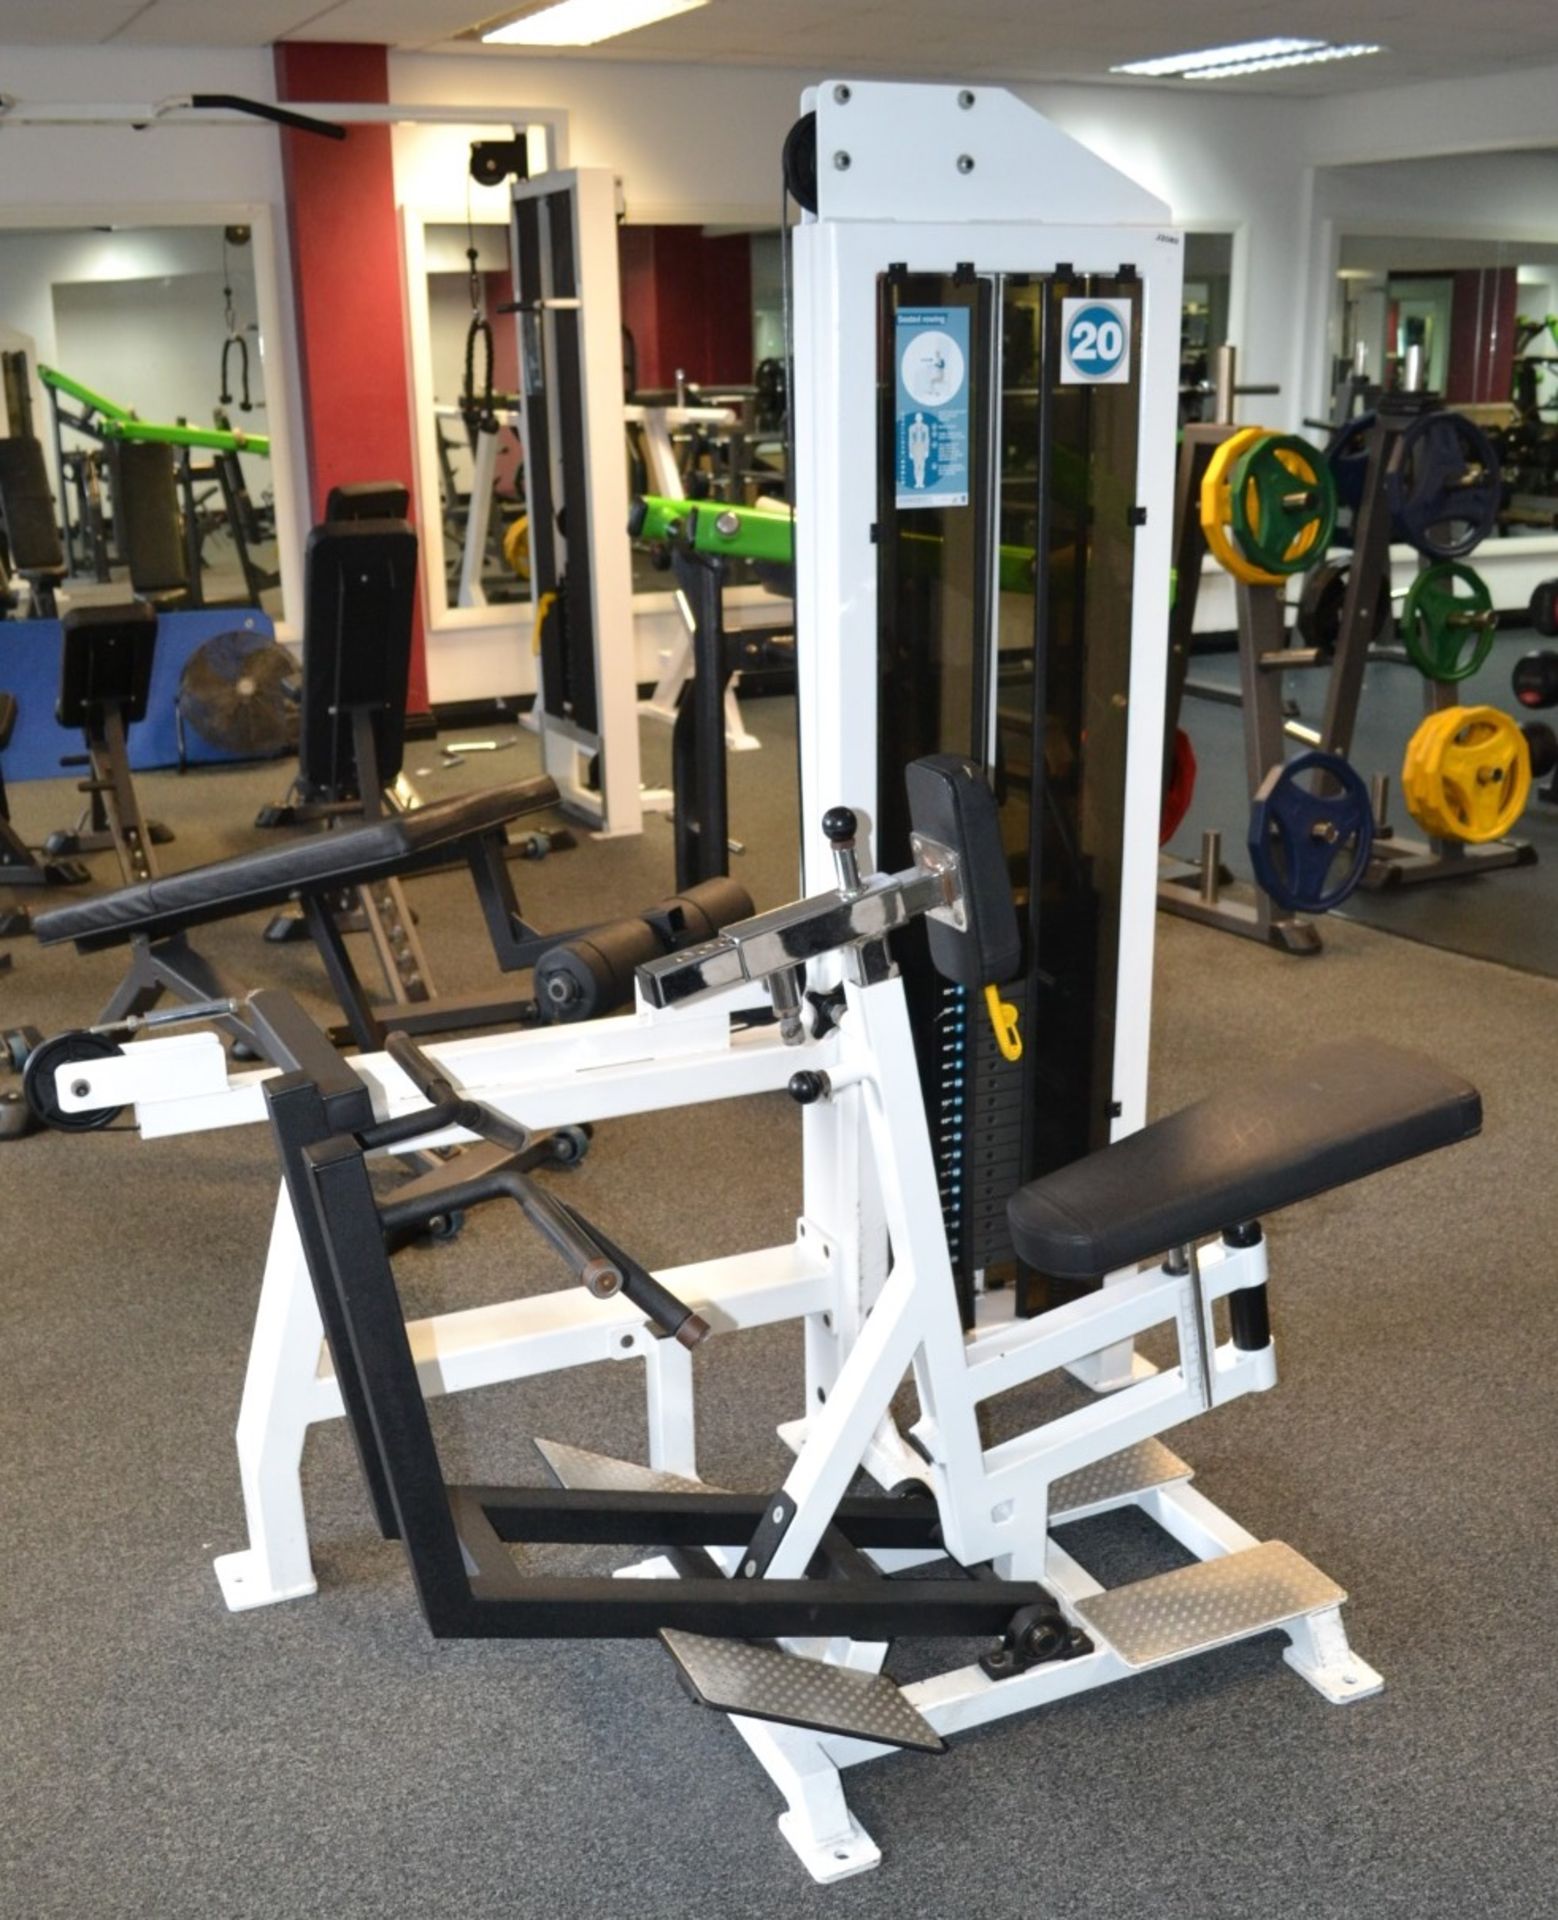 1 x Force Seated Row Pin Loaded Gym Machine With 100kg Weights - Ref: J2080/GFG